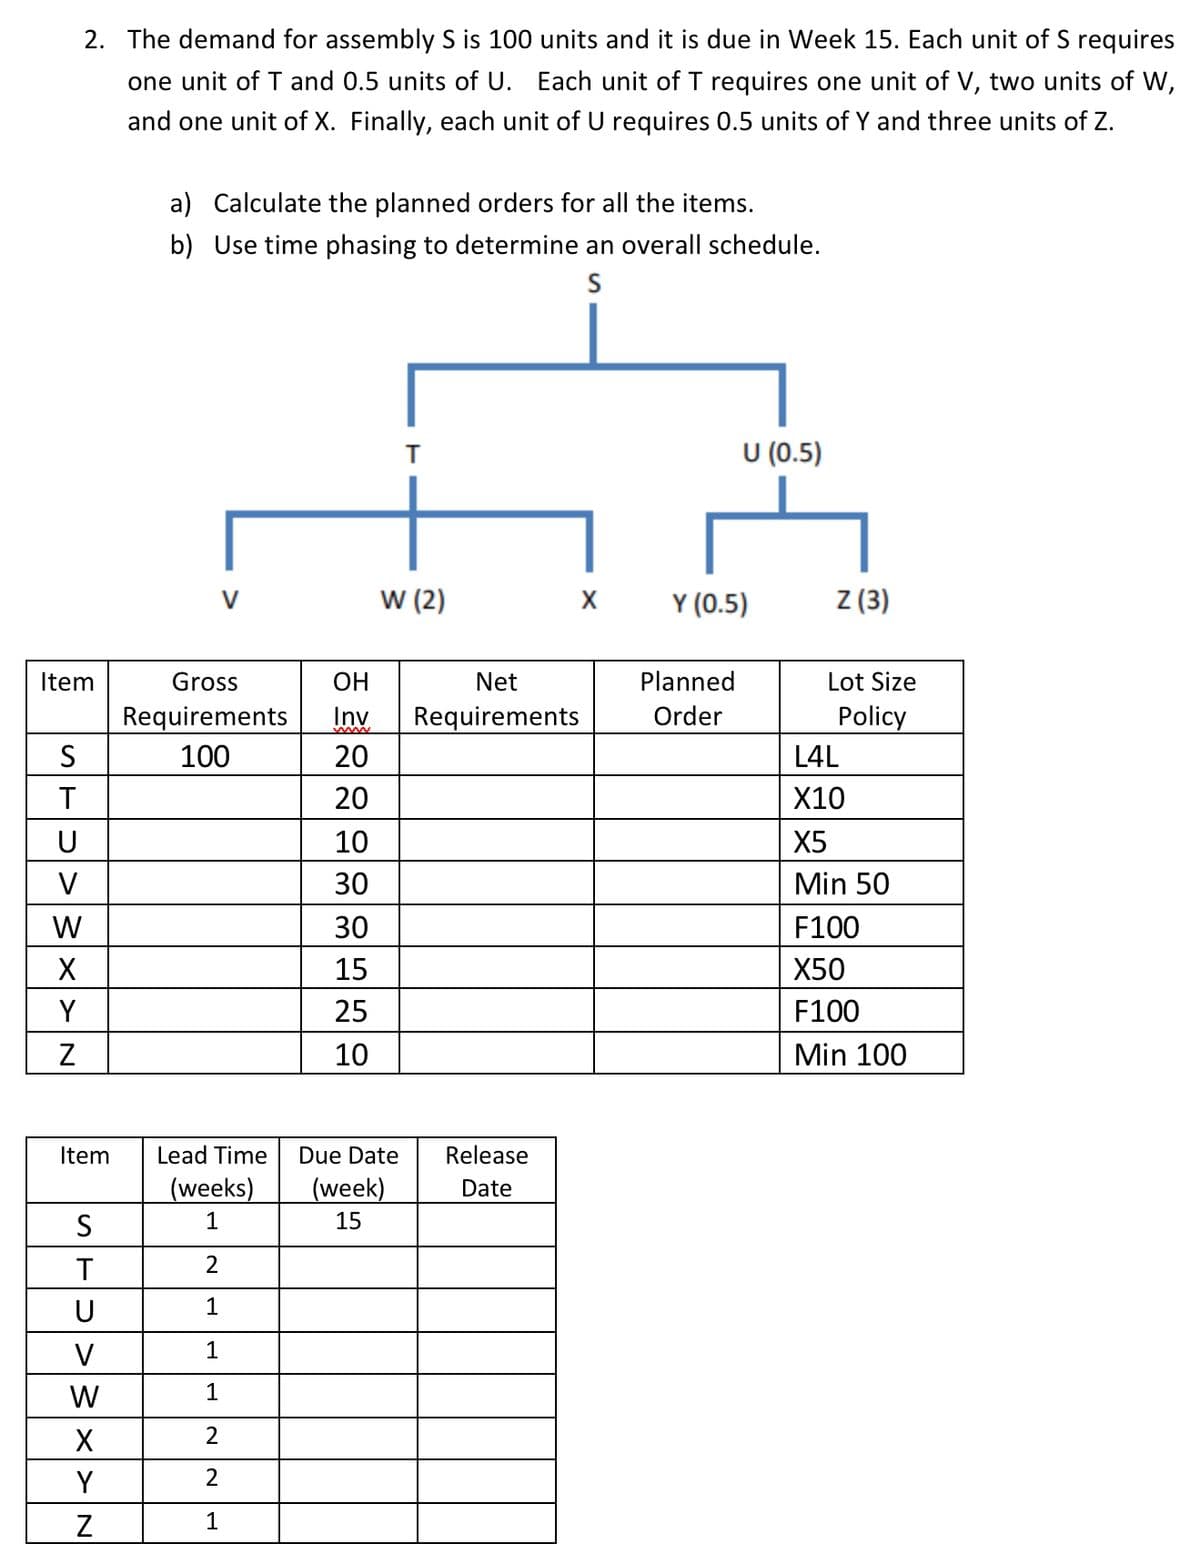 Item
STUVWX>N
Y
2. The demand for assembly S is 100 units and it is due in Week 15. Each unit of S requires
one unit of T and 0.5 units of U. Each unit of T requires one unit of V, two units of W,
and one unit of X. Finally, each unit of U requires 0.5 units of Y and three units of Z.
Z
Item
S
T
U
V
W
X
Y
Z
a) Calculate the planned orders for all the items.
b) Use time phasing to determine an overall schedule.
S
OH
Gross
Requirements Inv
100
20
20
10
30
30
15
25
10
2
1
1
1
2
2
1
Lead Time Due Date
(weeks)
(week)
15
1
T
W (2)
X
Net
Requirements
Release
Date
U (0.5)
Y (0.5)
Planned
Order
Z (3)
Lot Size
Policy
L4L
X10
X5
Min 50
F100
X50
F100
Min 100